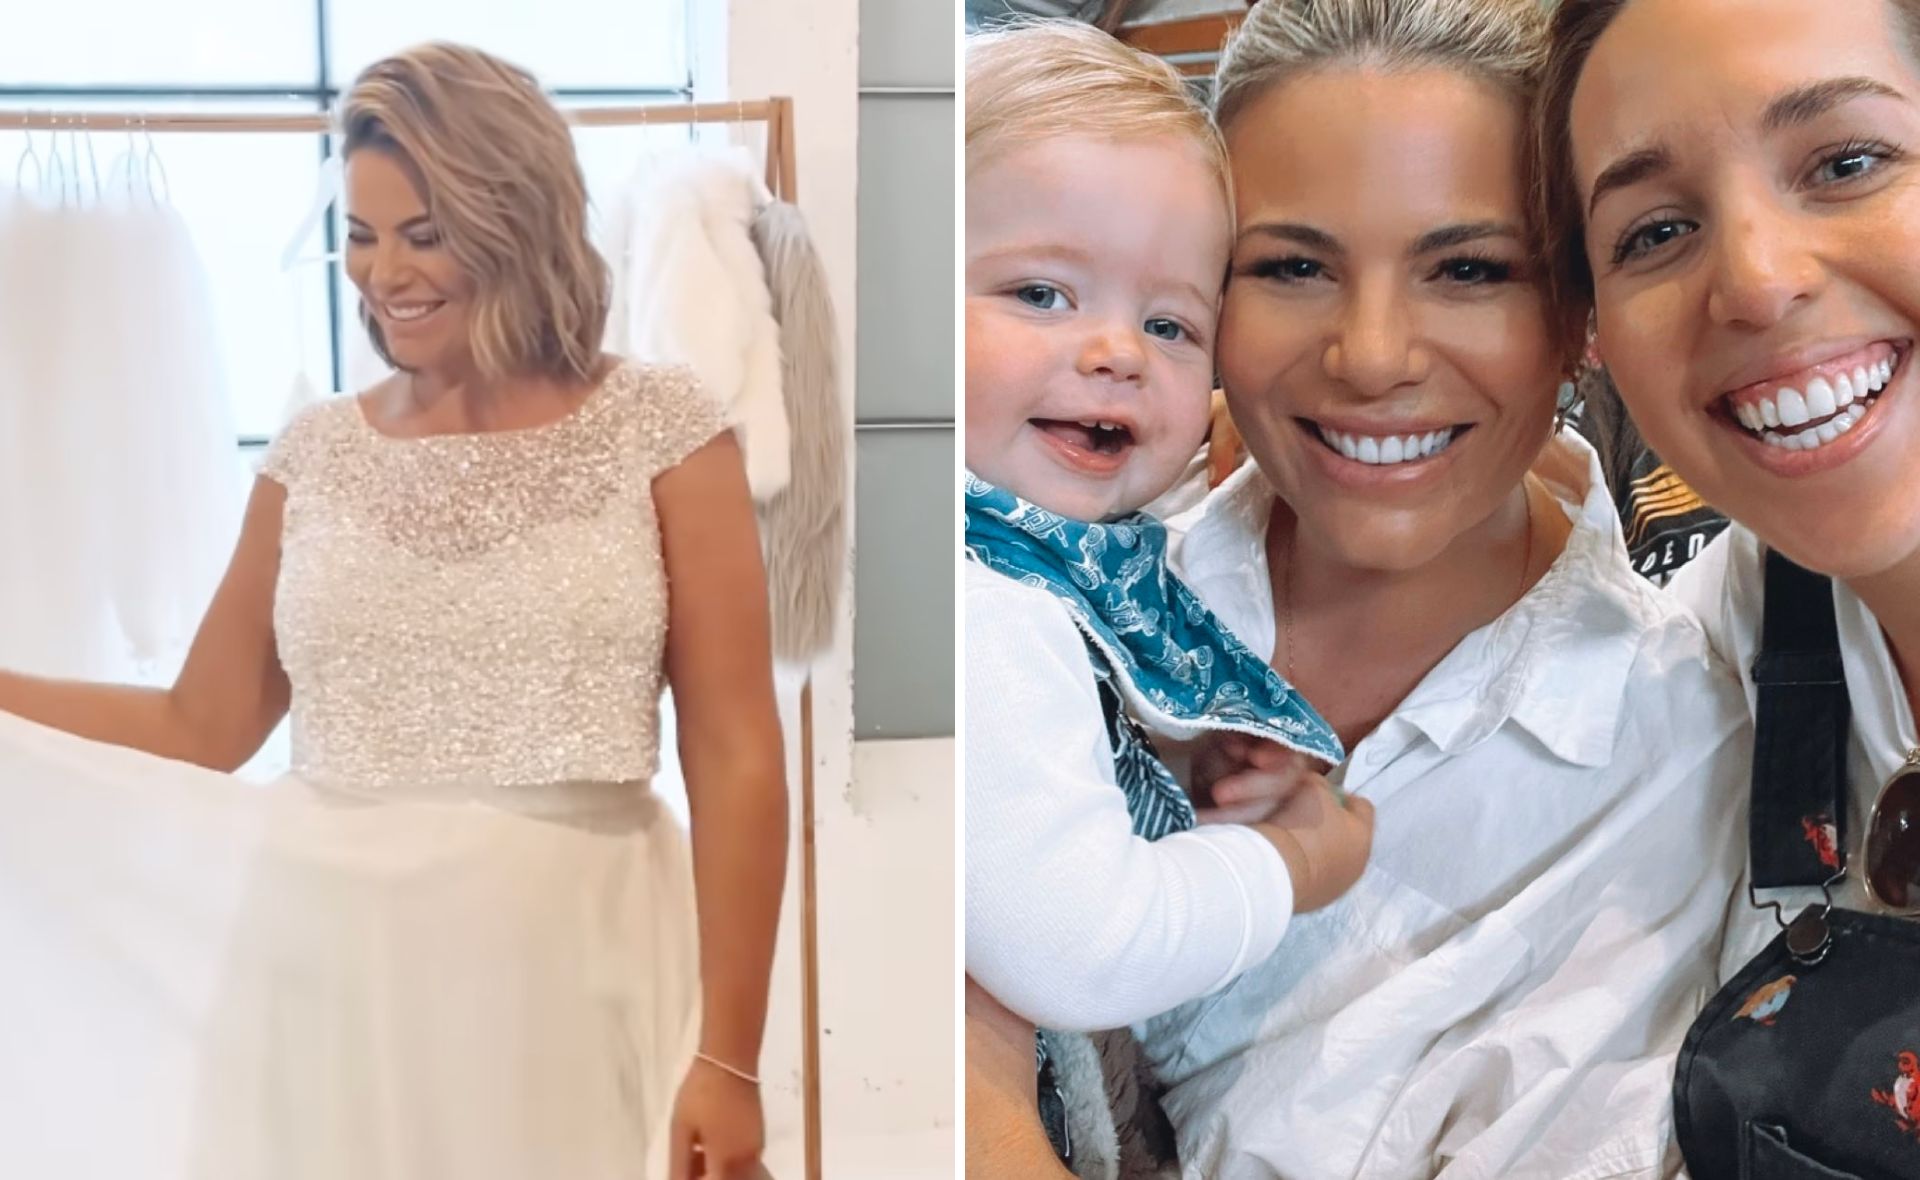 “Not long now”: Fiona Falkiner stuns as she shows off her wedding dress ahead of her nuptials with Hayley Willis